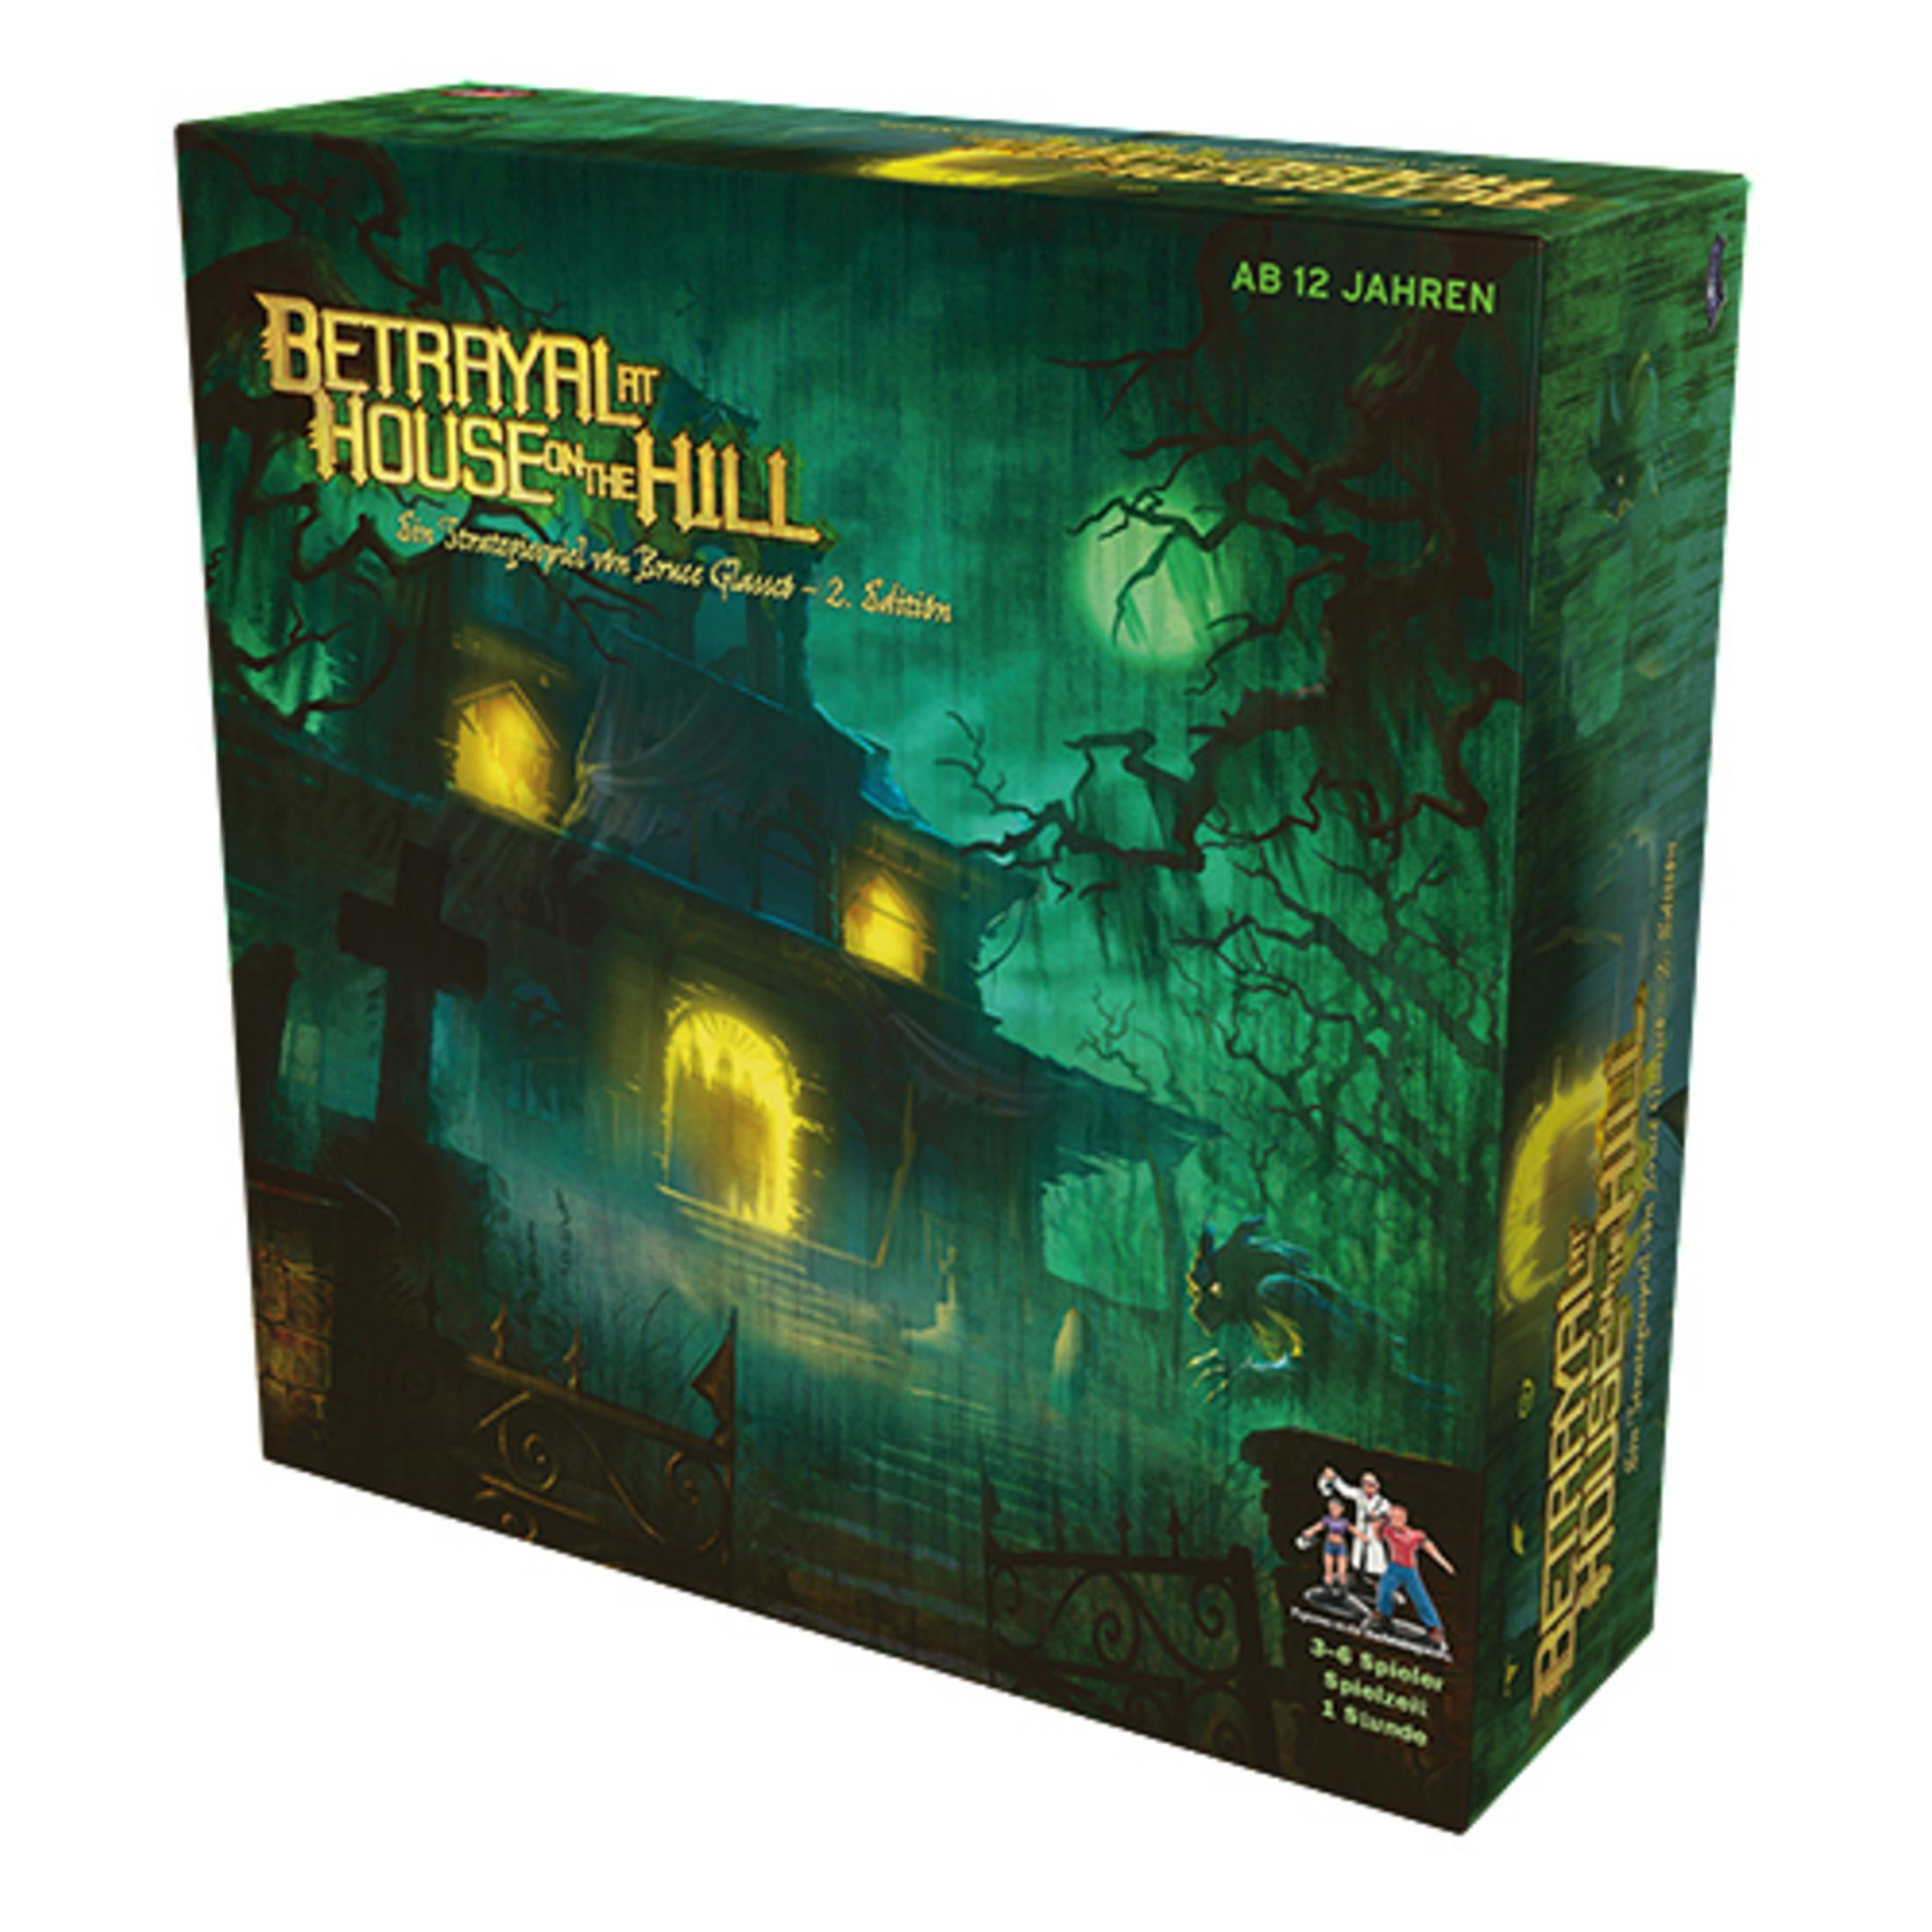 AT COAST OF HILL THE WOCD0001 ON BETRAYAL HOUSE WIZARDS THE Brettspiel